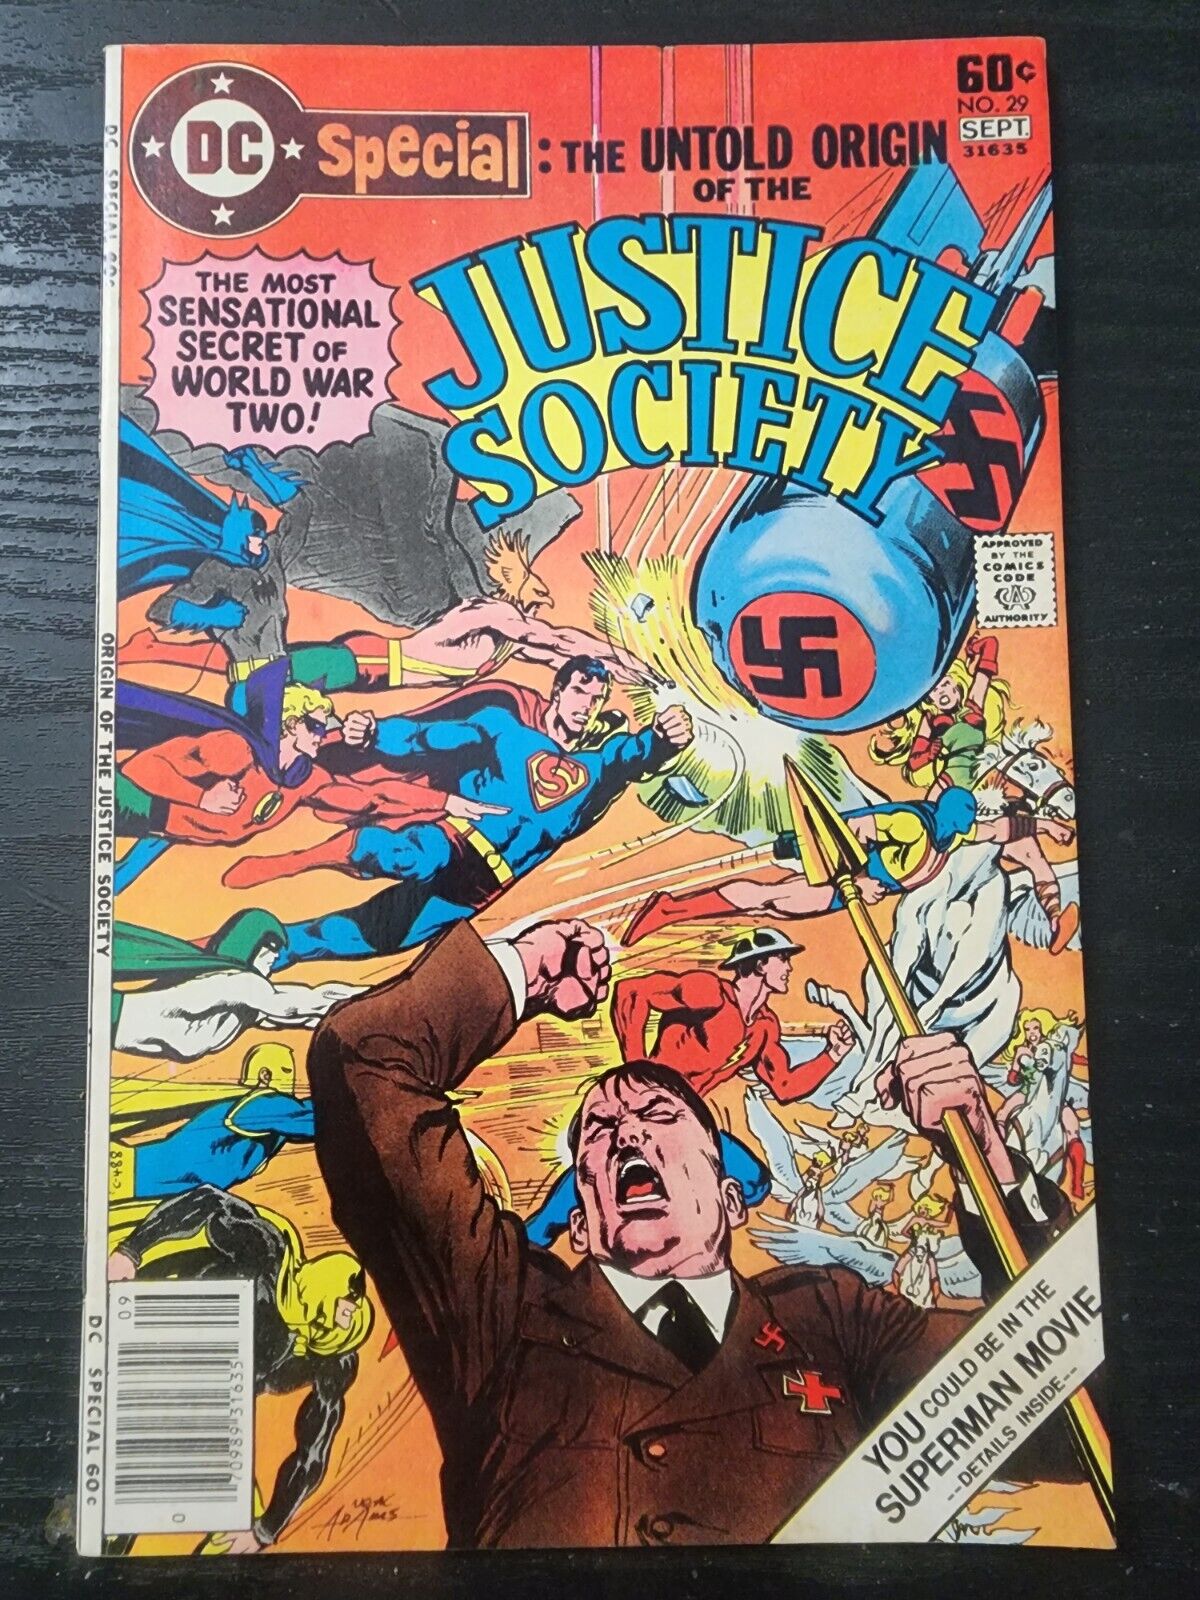 DC Special (1968) Issue 29 ~ The Untold Origin  Of  The Justice Society 